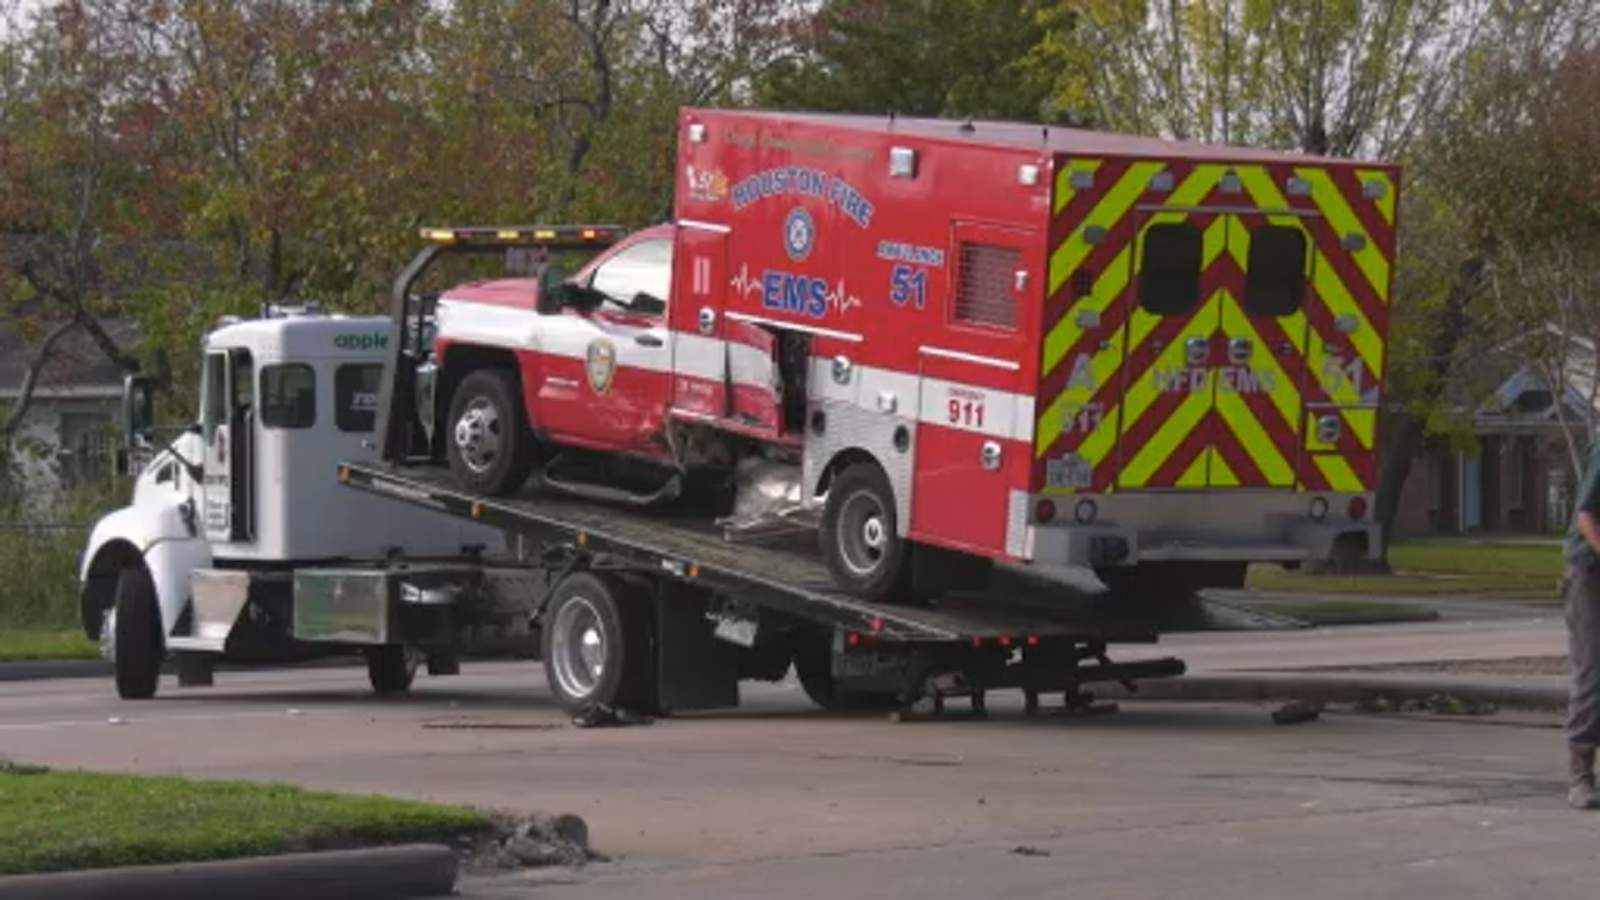 Suspected drunk driver strikes HFD ambulance outside fire station, police say